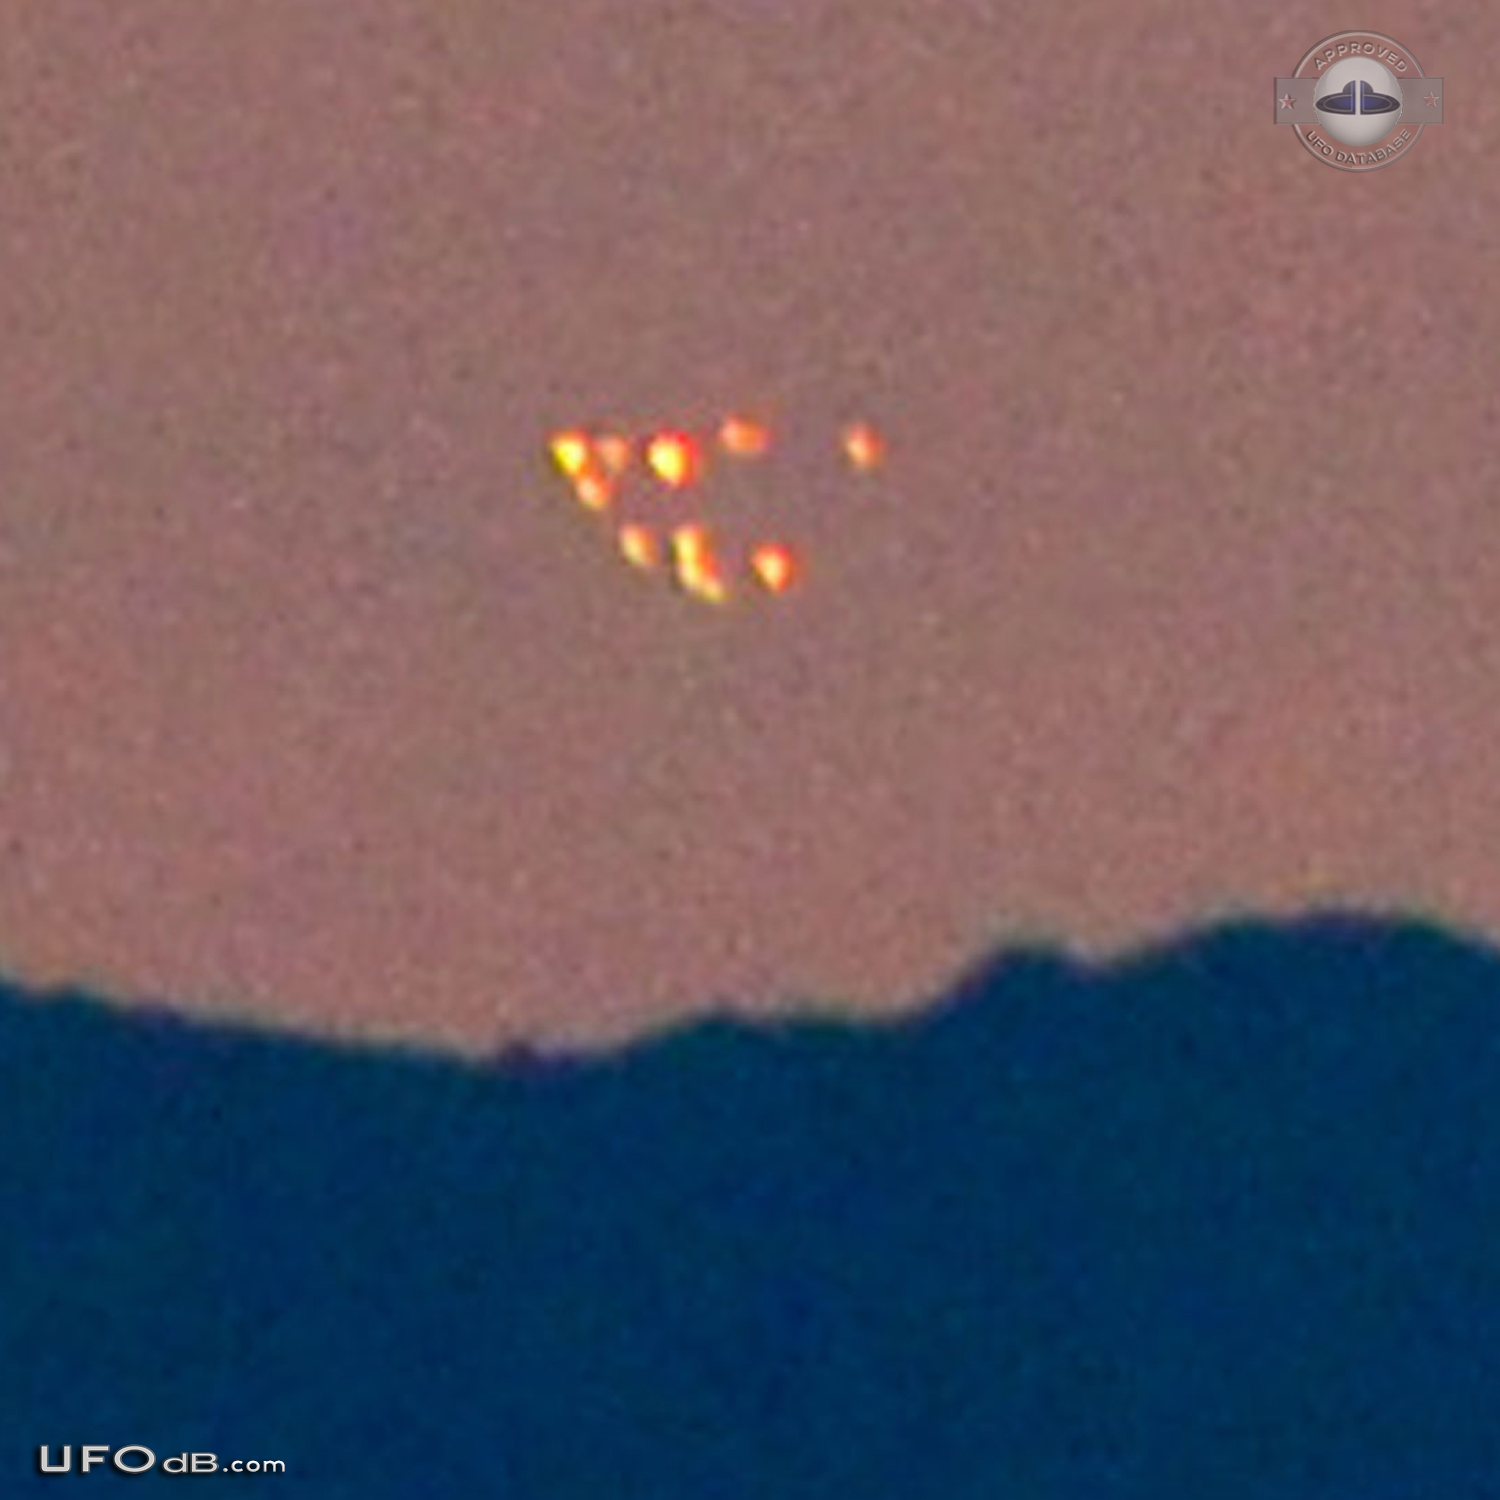 Famous UFO photos in the News - Fleet of UFOs Gila Bend, Arizona 2012 UFO Picture #534-2